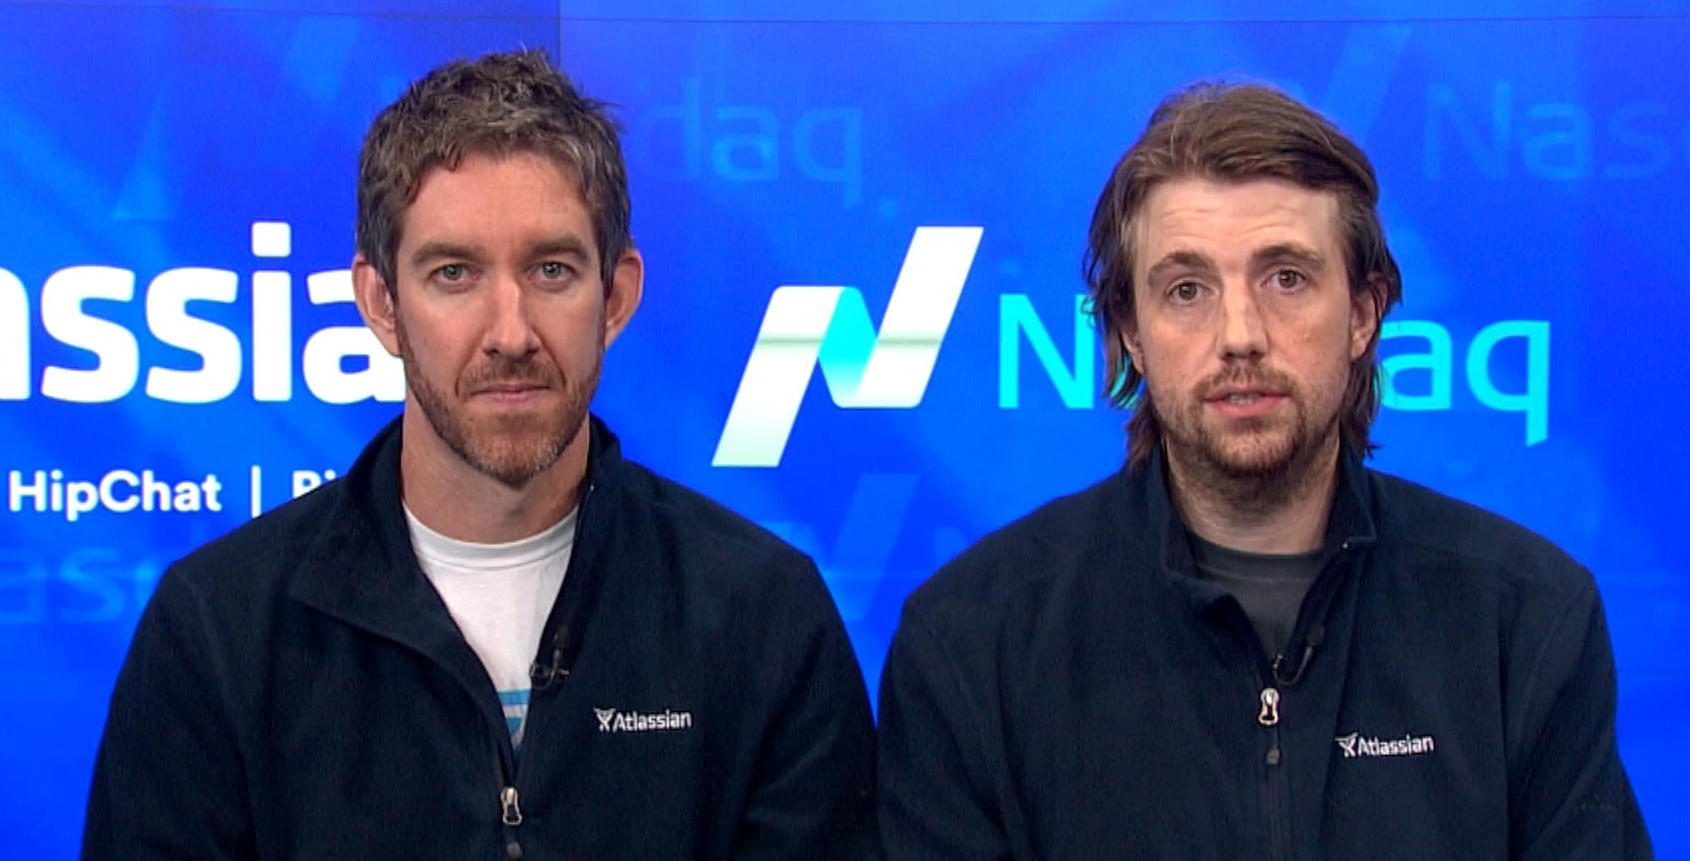 Atlassian sells chat products to Slack, takes stake in startup